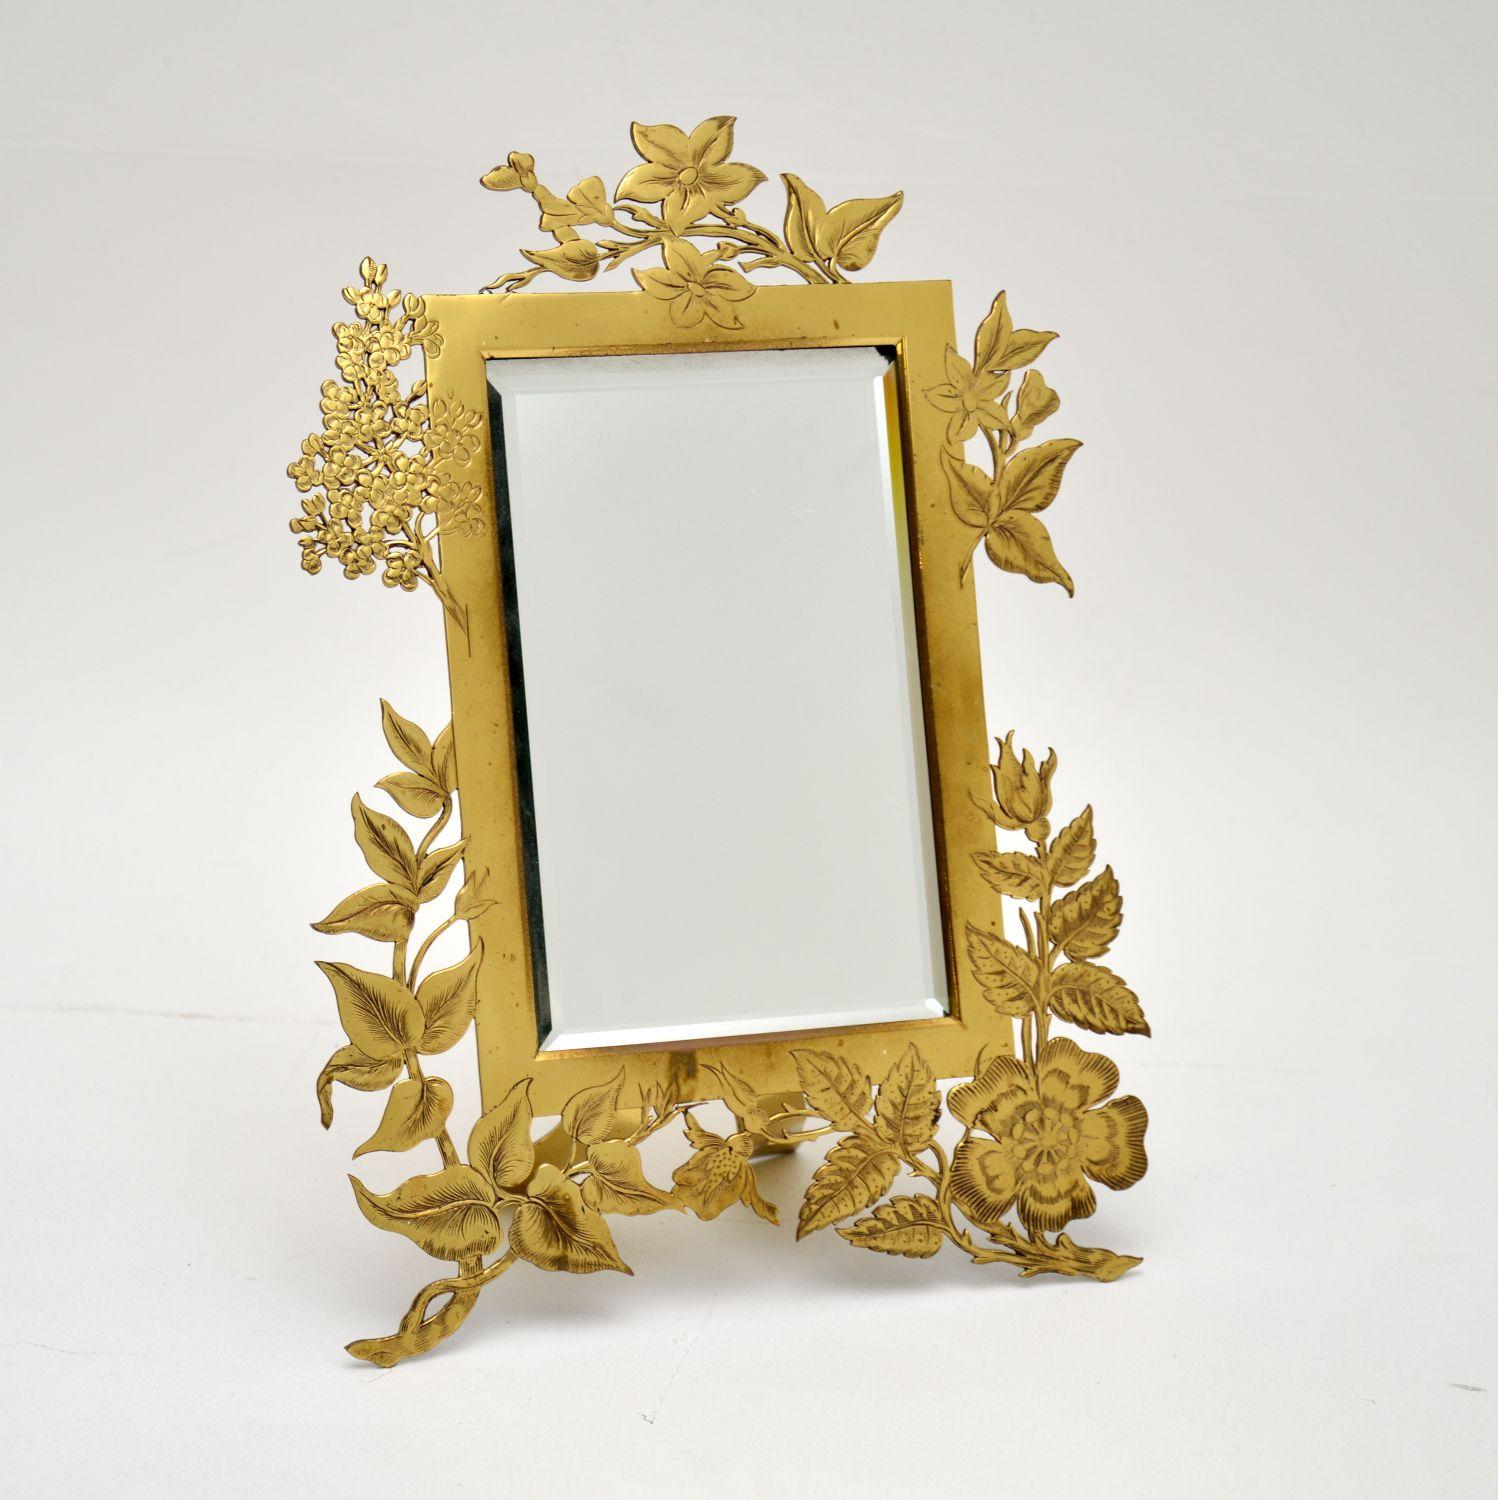 A stunning antique Art Nouveau table top mirror in solid brass. This was made in England, it dates from around 1890-1910 period.

The quality is amazing, this is beautifully crafted and has gorgeous decorations. The inset mirror is bevelled &